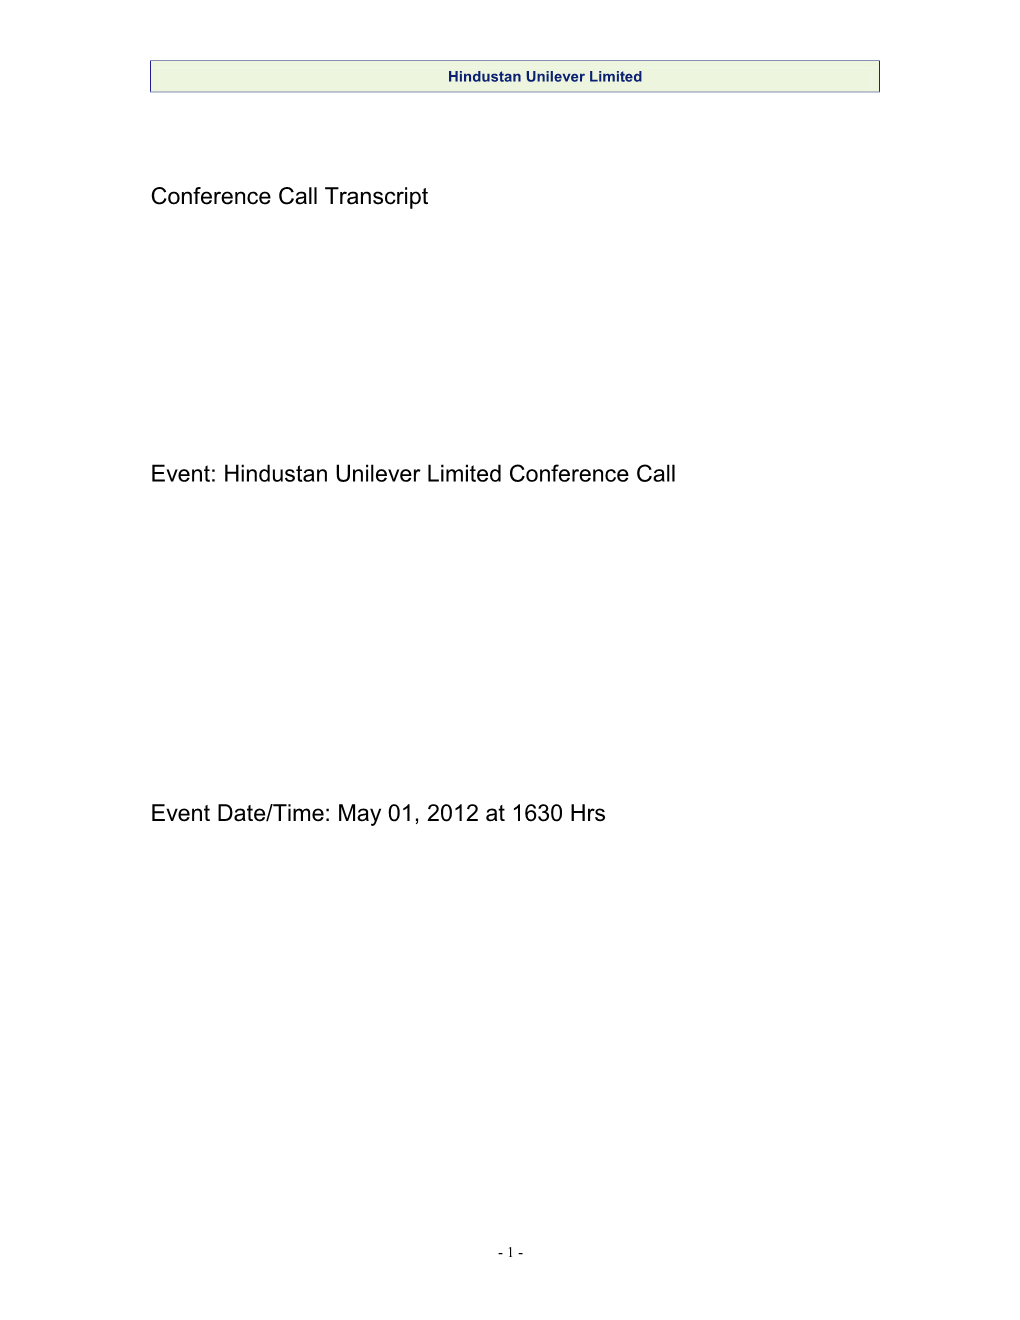 Transcript of Sonata Software Limited Conference Call